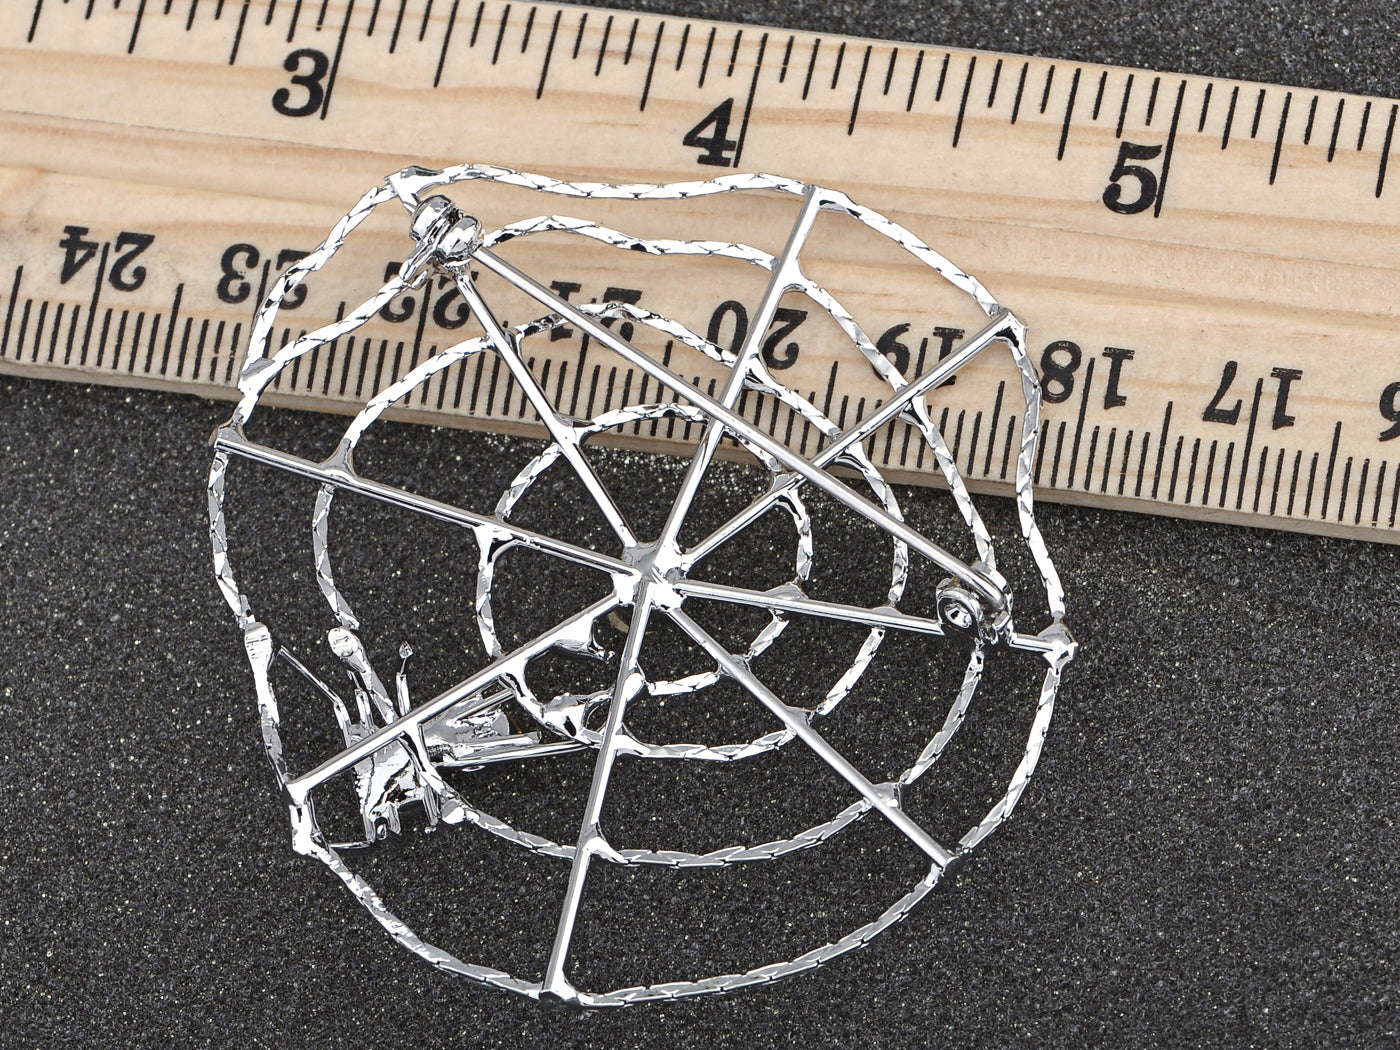 Spider & Web Crawl Insect Bug Pin Brooch